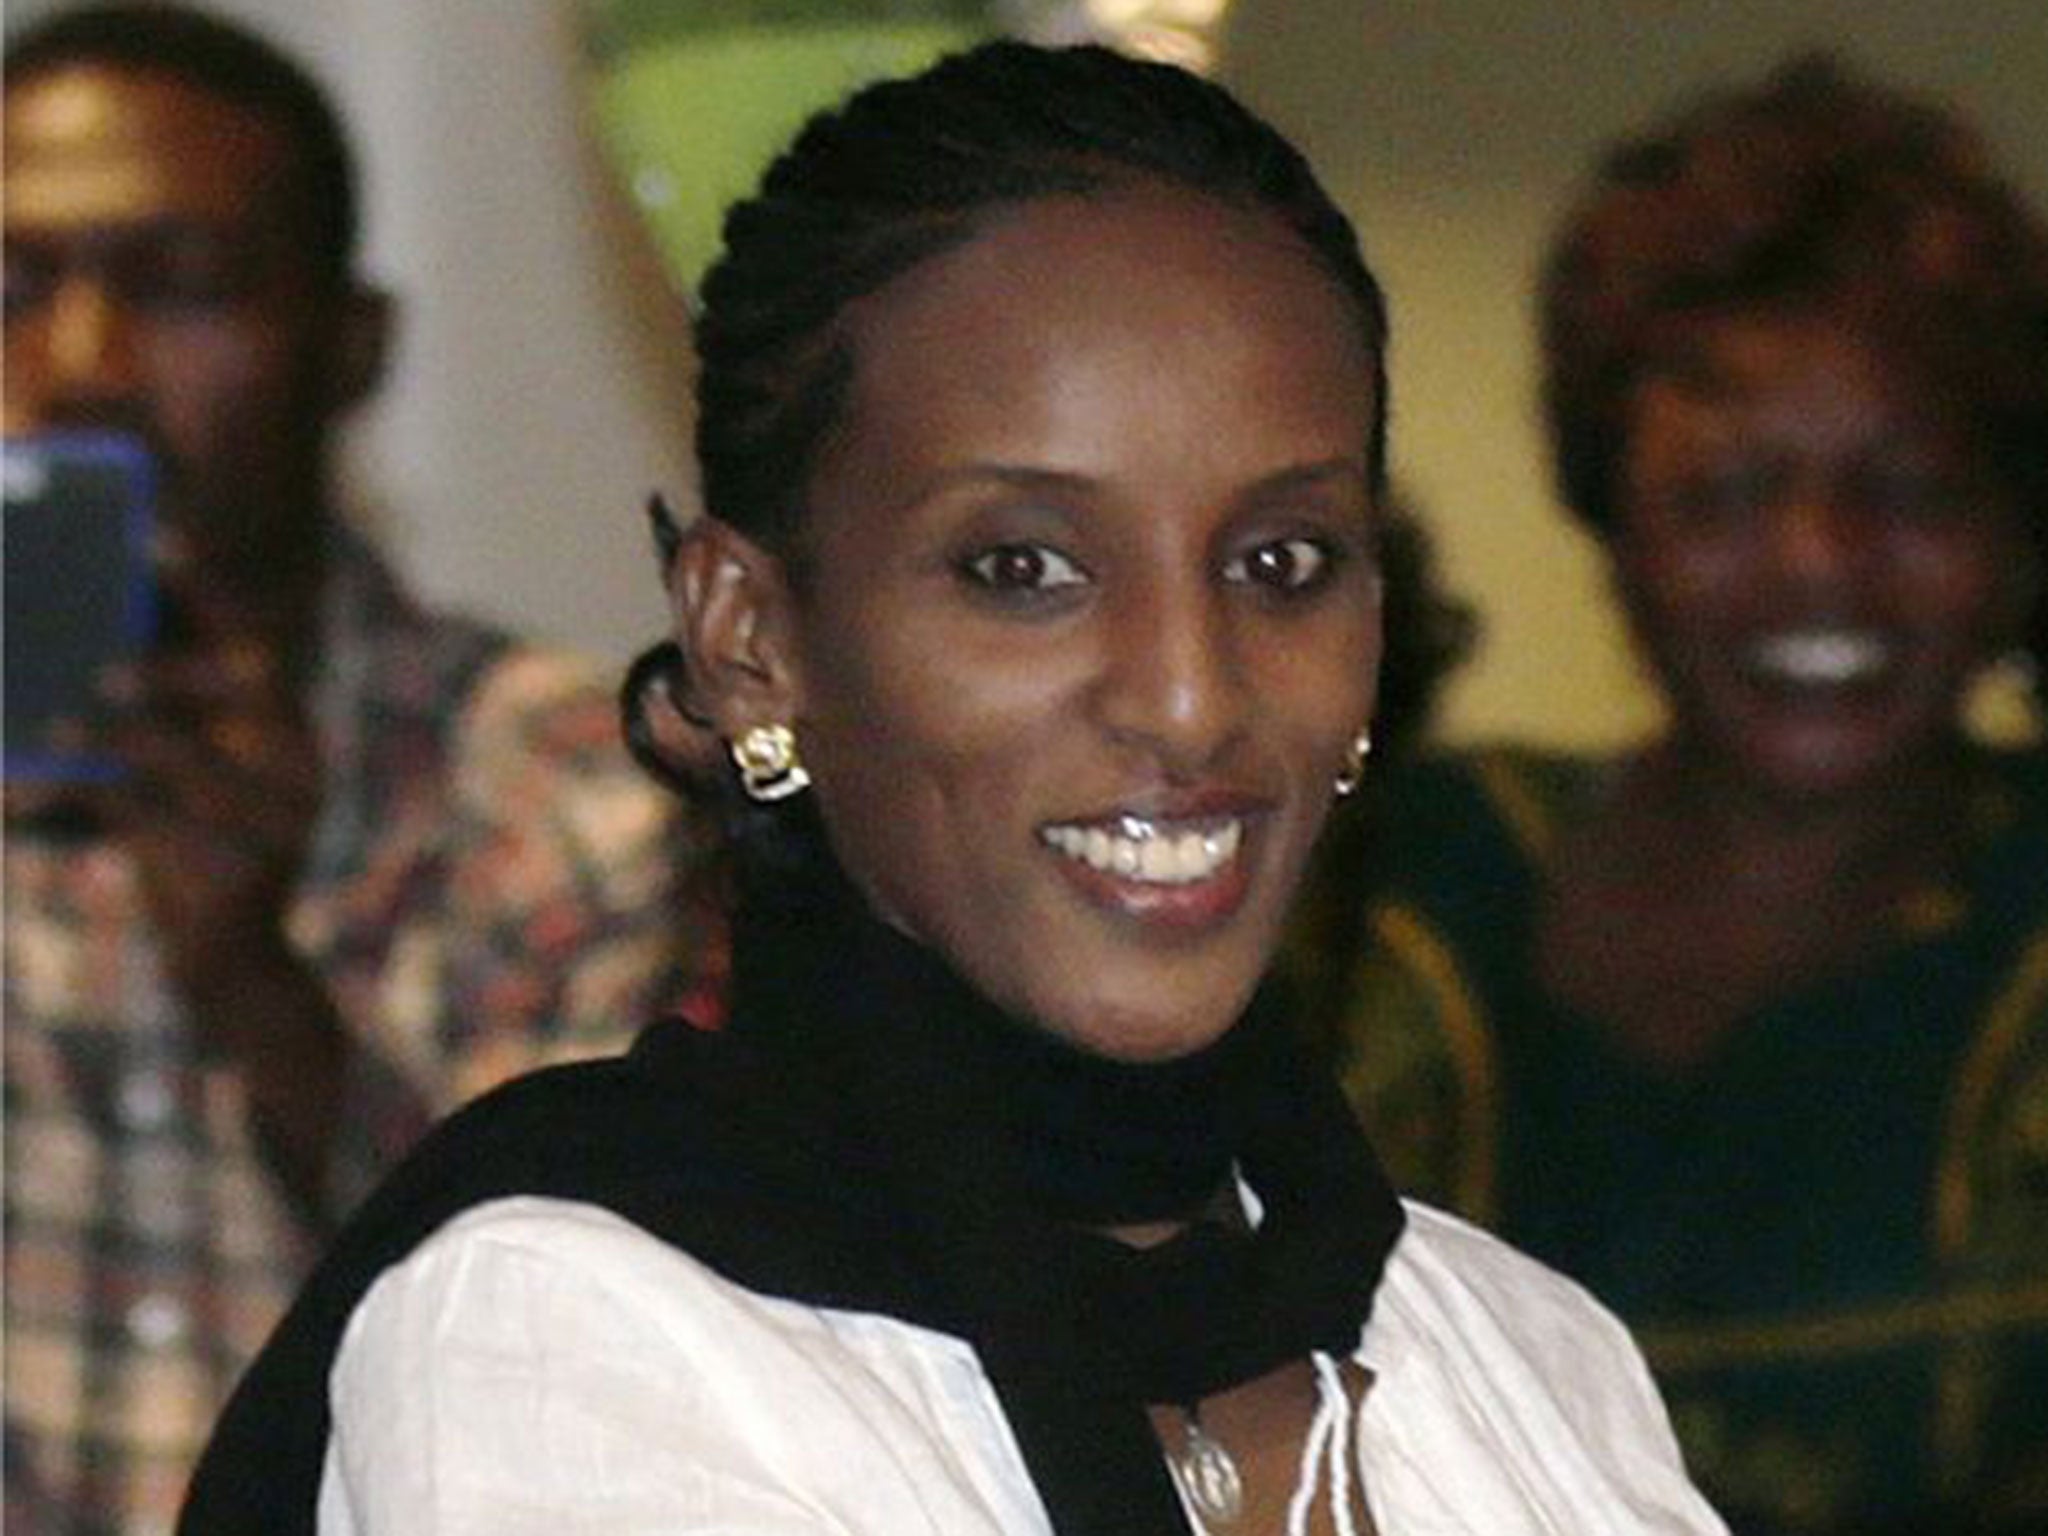 Meriam Yahya Ibrahim just after her release from a Sudanese prison